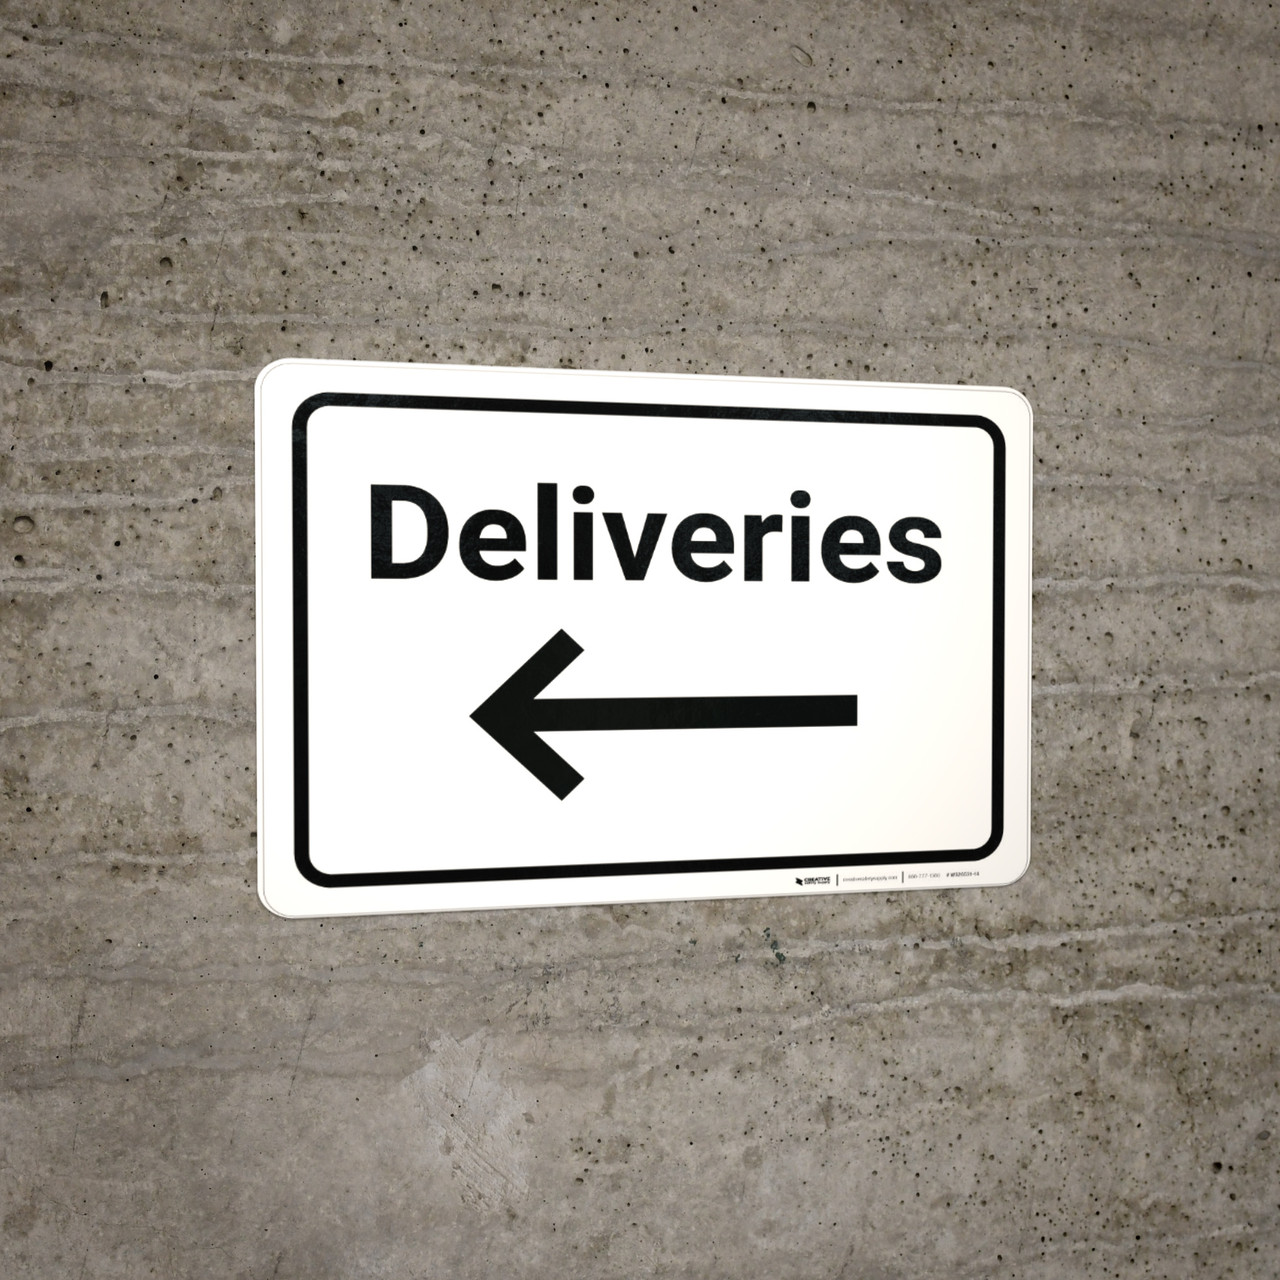 Deliveries with Arrow Left - Wall Sign | Creative Safety Supply